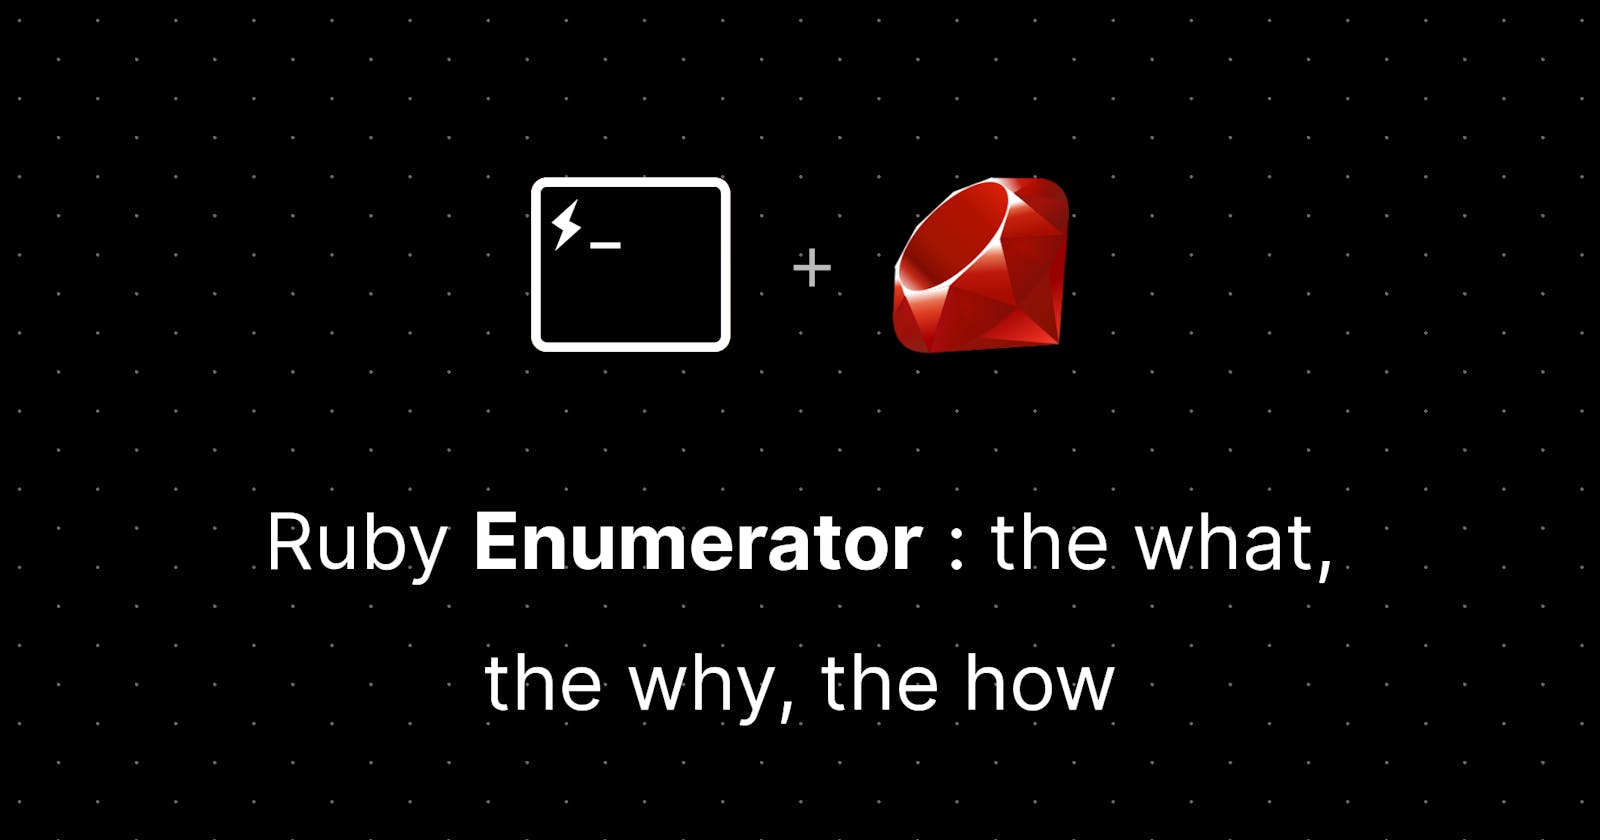 Ruby Enumerator : the what, the why, the how